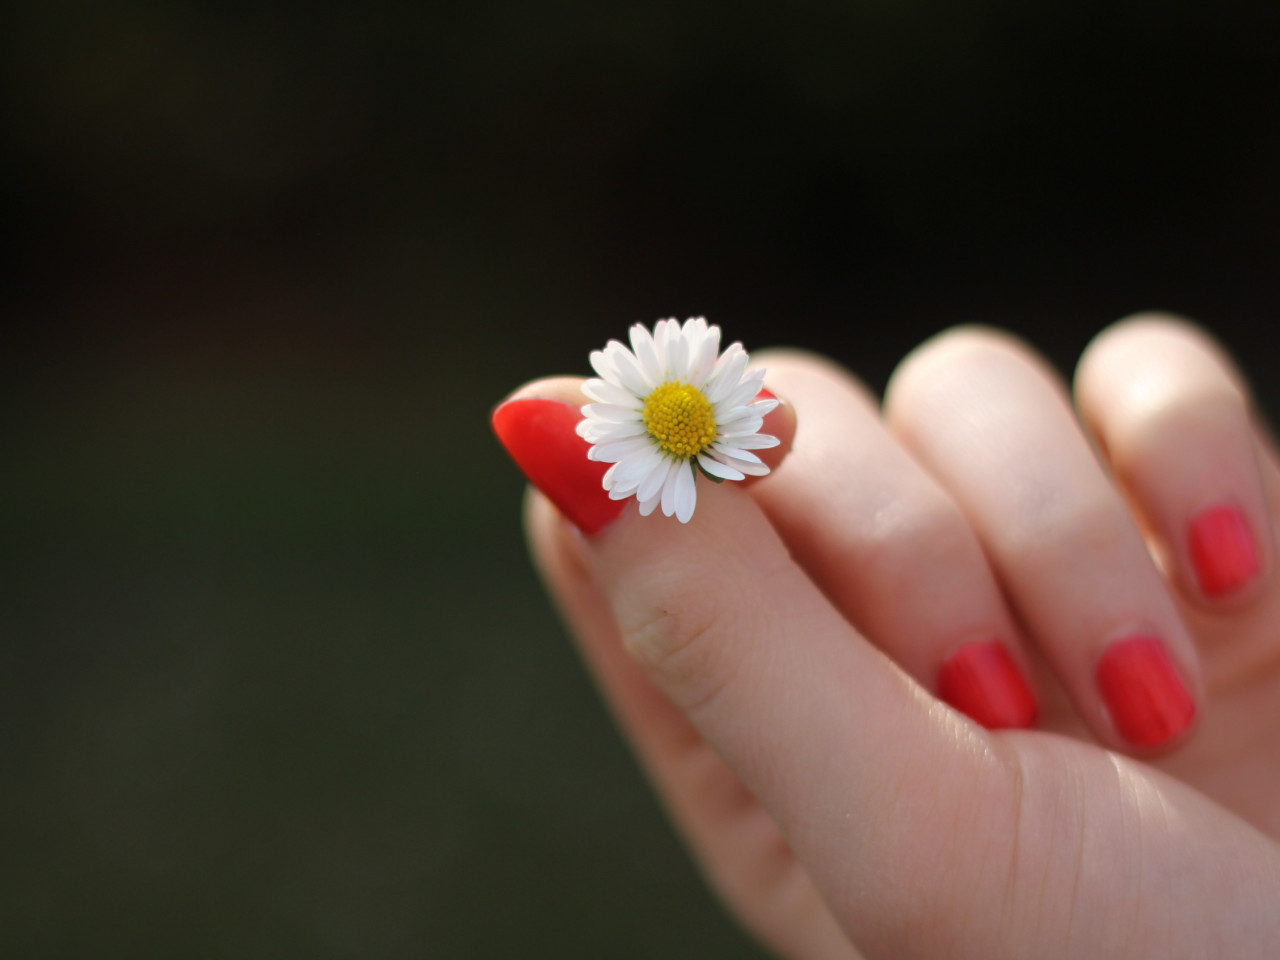 Girl with red nails and a daisy flower wallpaper 1280x960